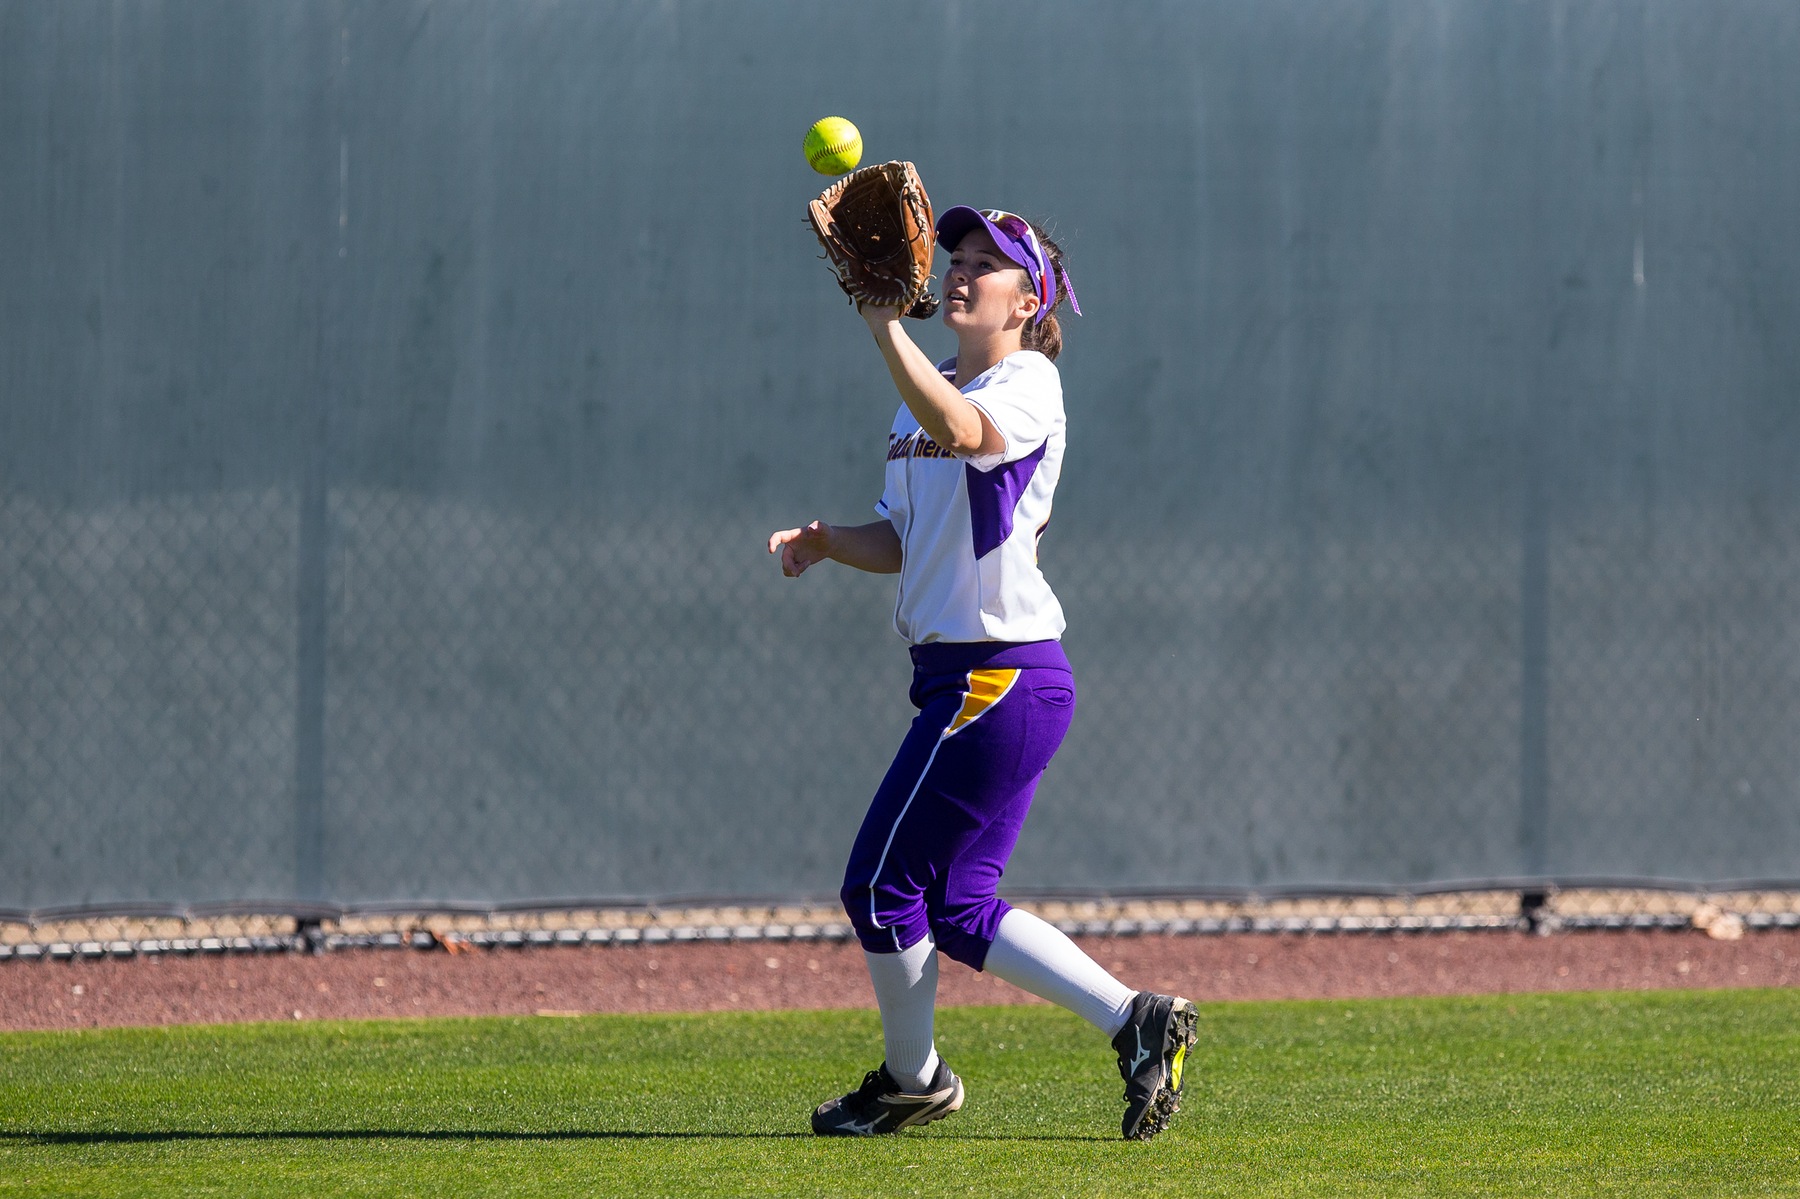 Cat Slabaugh catches a fly ball. (Credit: Dave Donovan)